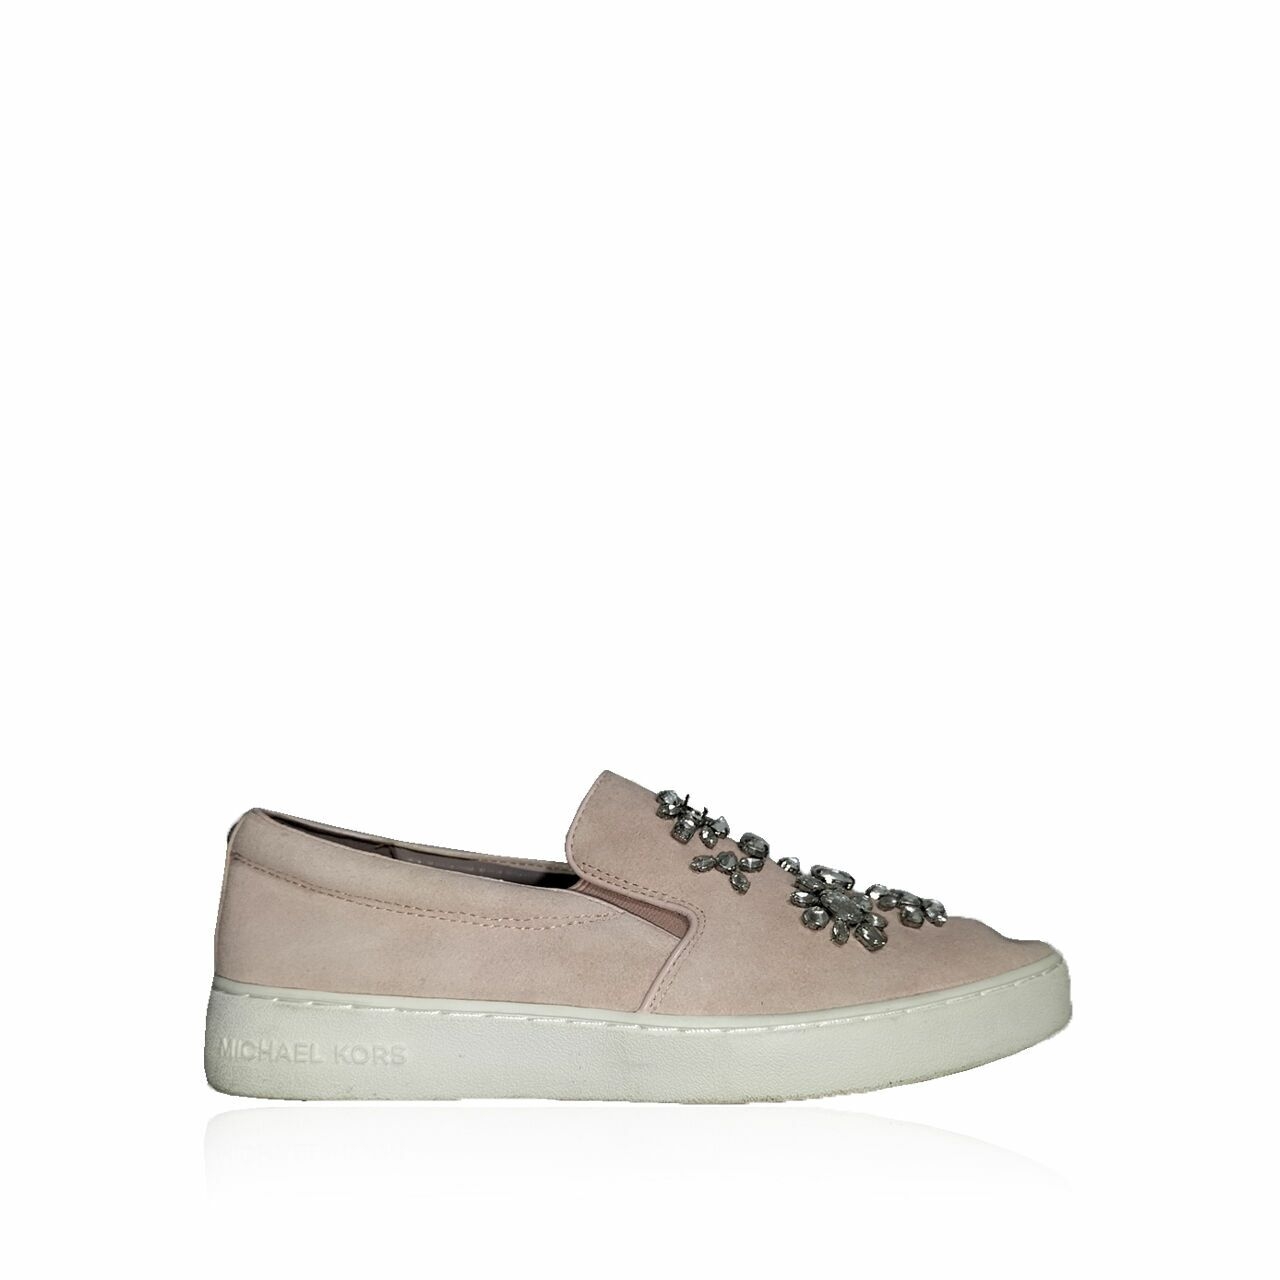 Michael Kors Pink With Embellishment Detail Slip On Sneakers